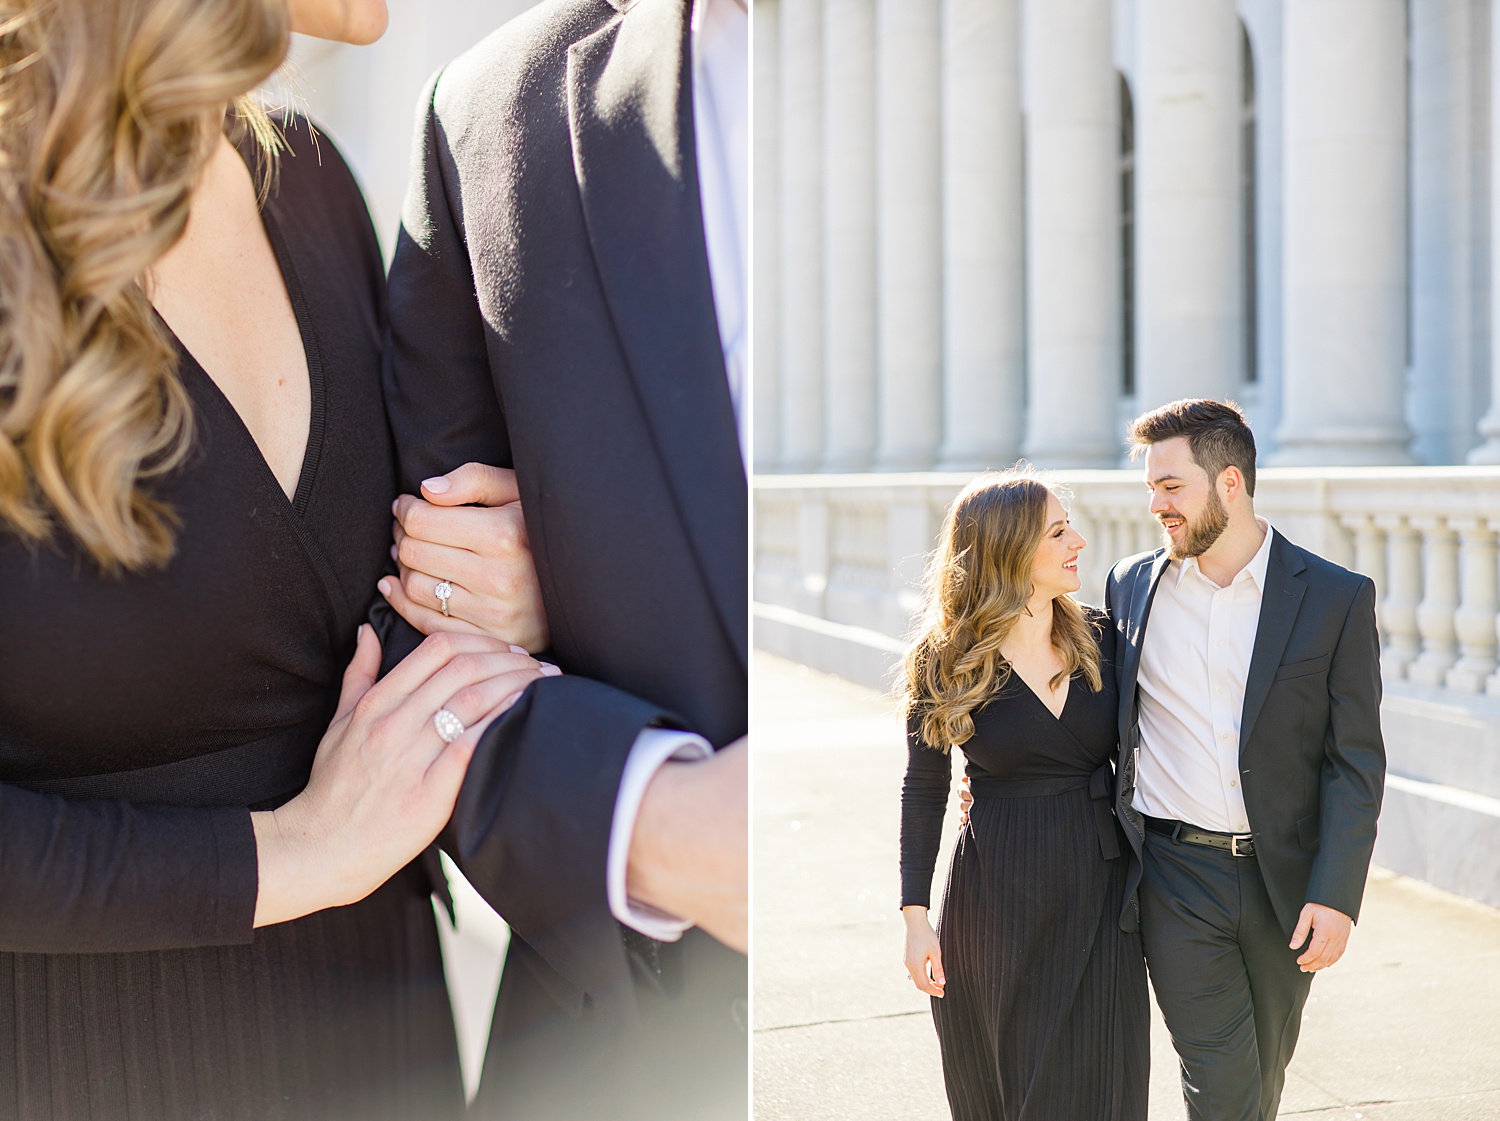 couple walk through downtown with linked arms